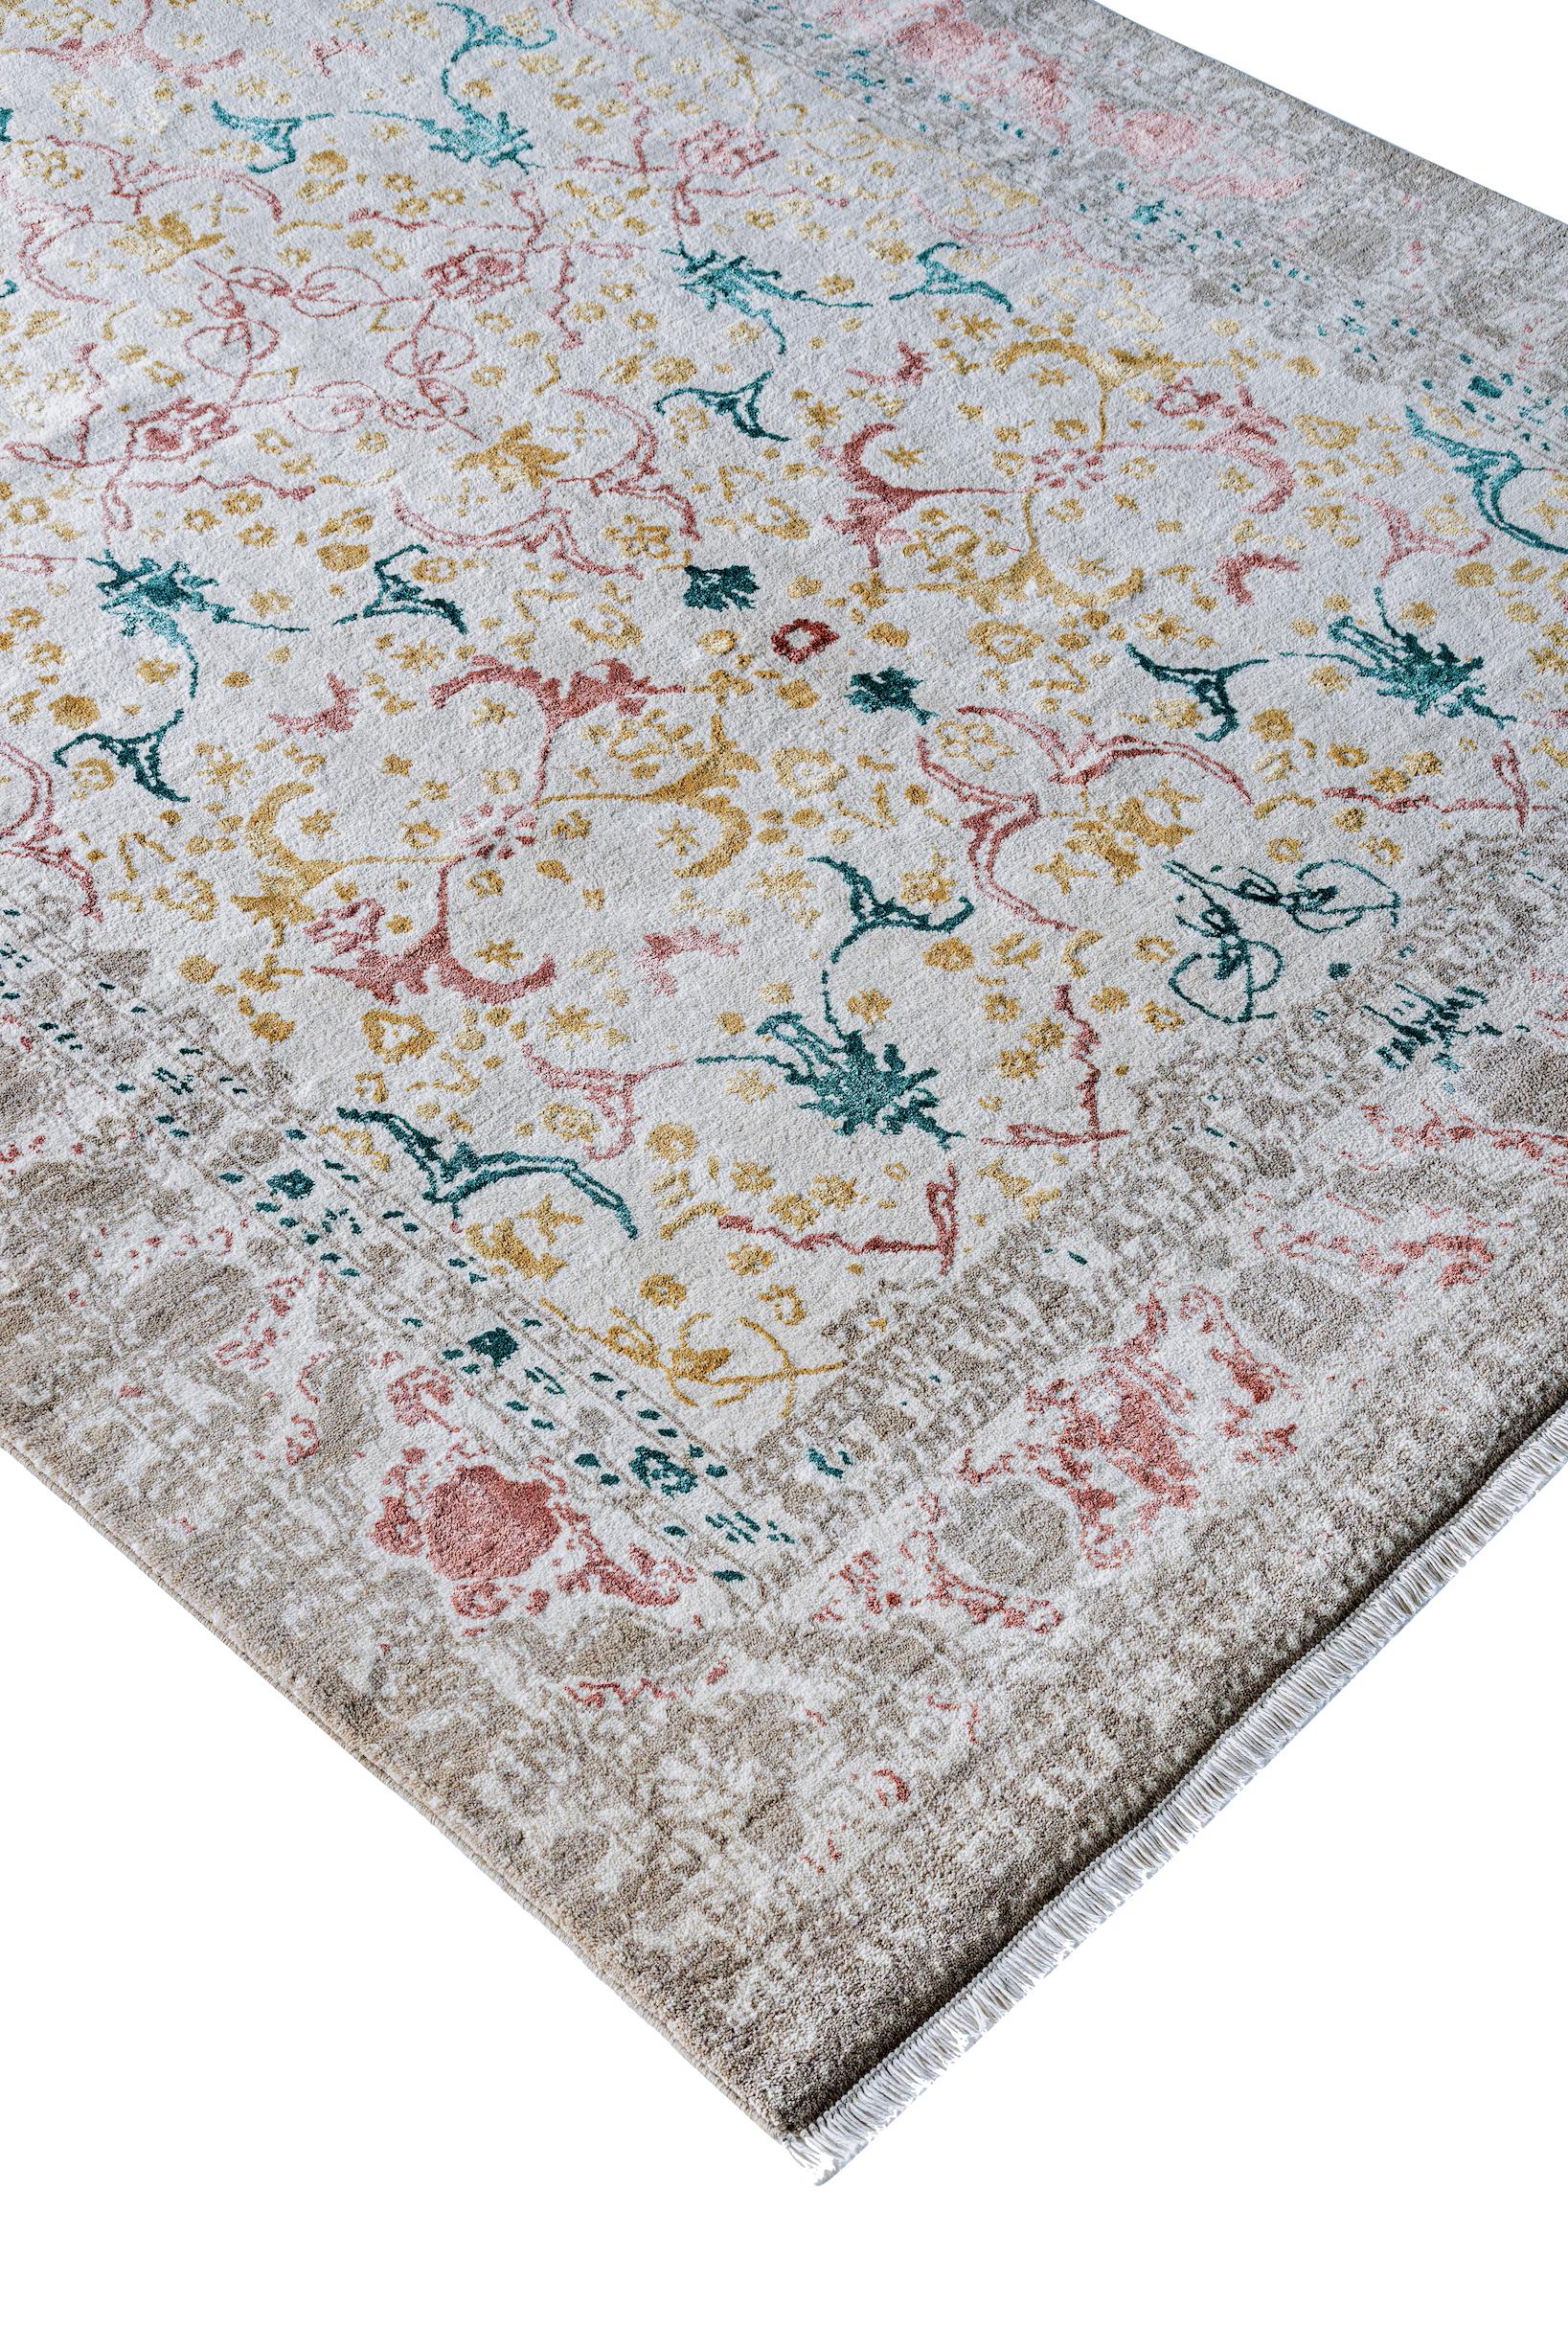 About the rug:
This is a hand-knotted rug with 160,000 knots per square meter in a double knot construction. It is made of face yarn that is Egyptian wool with bamboo silk inlays, and the warp and weft are 100% Egyptian cotton. The pile height is